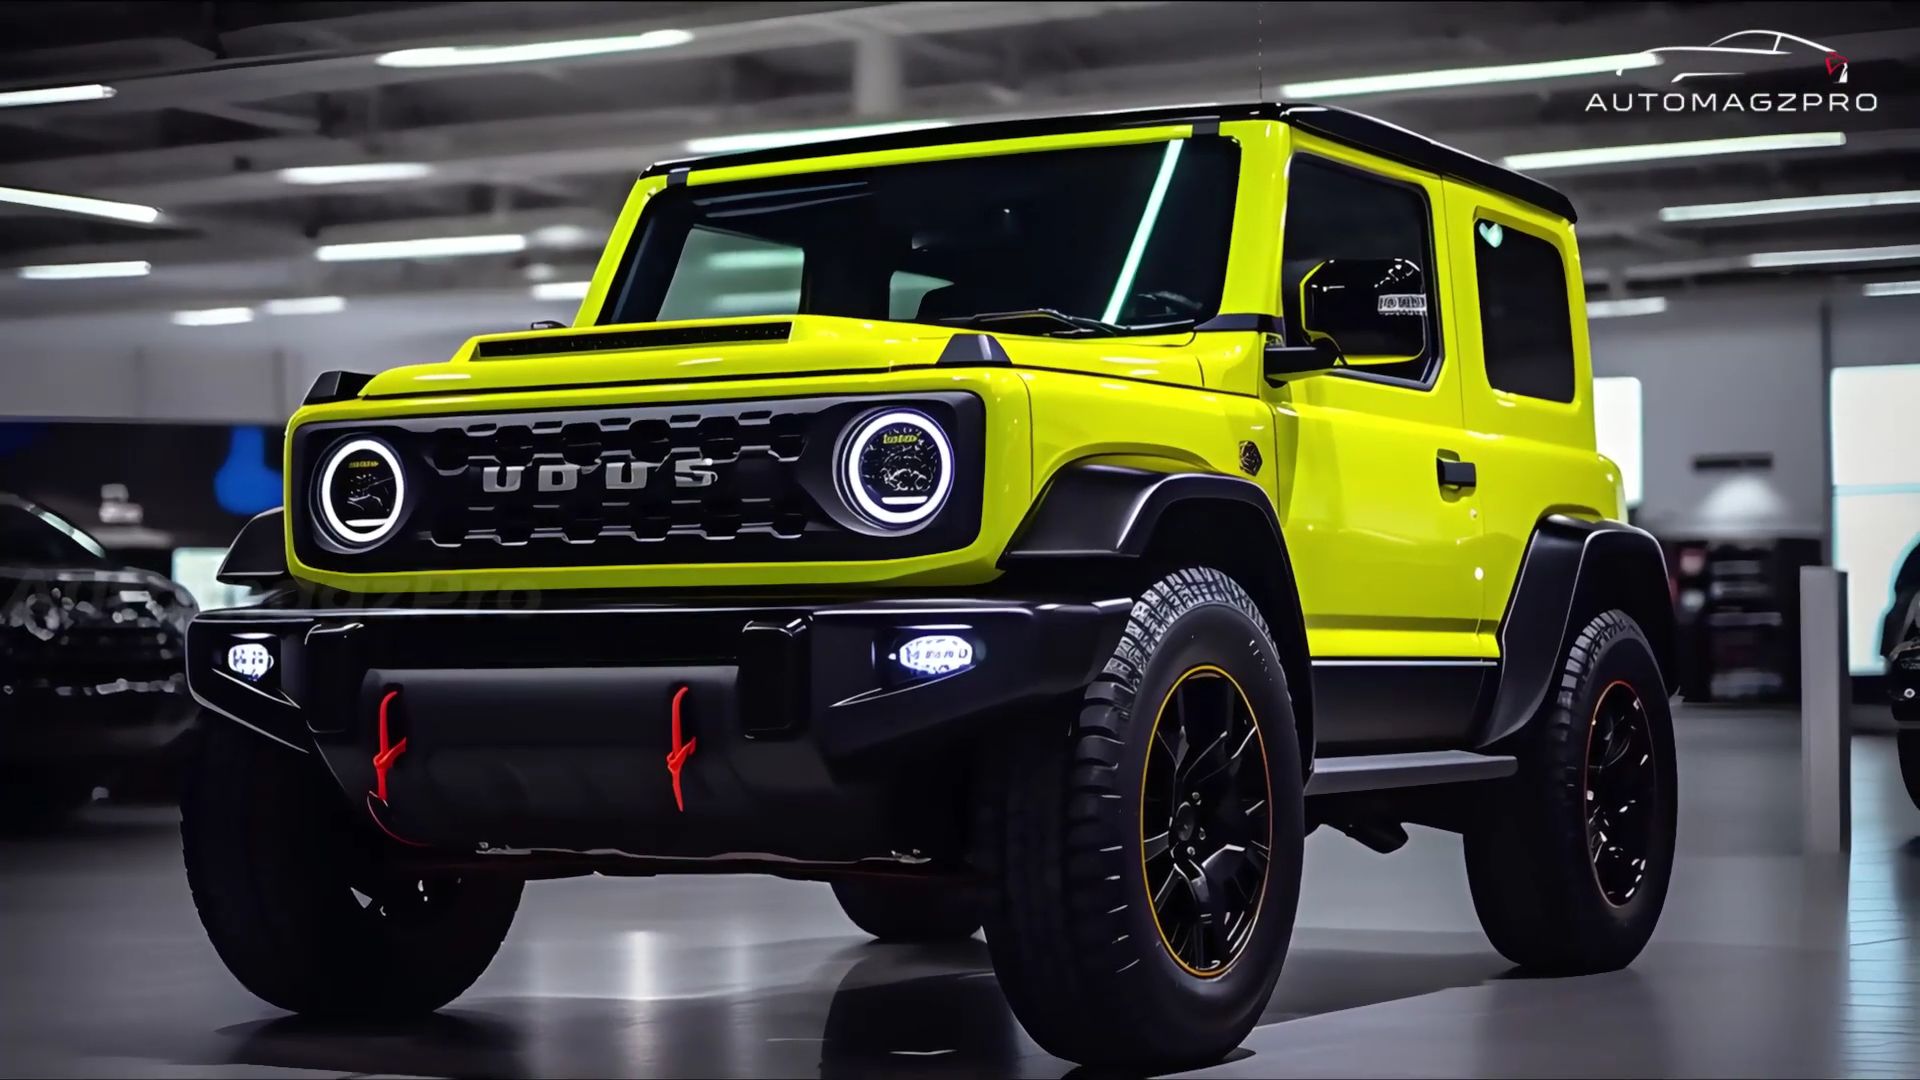 Did you know Japan gets another version of the Suzuki Jimny? - Drive